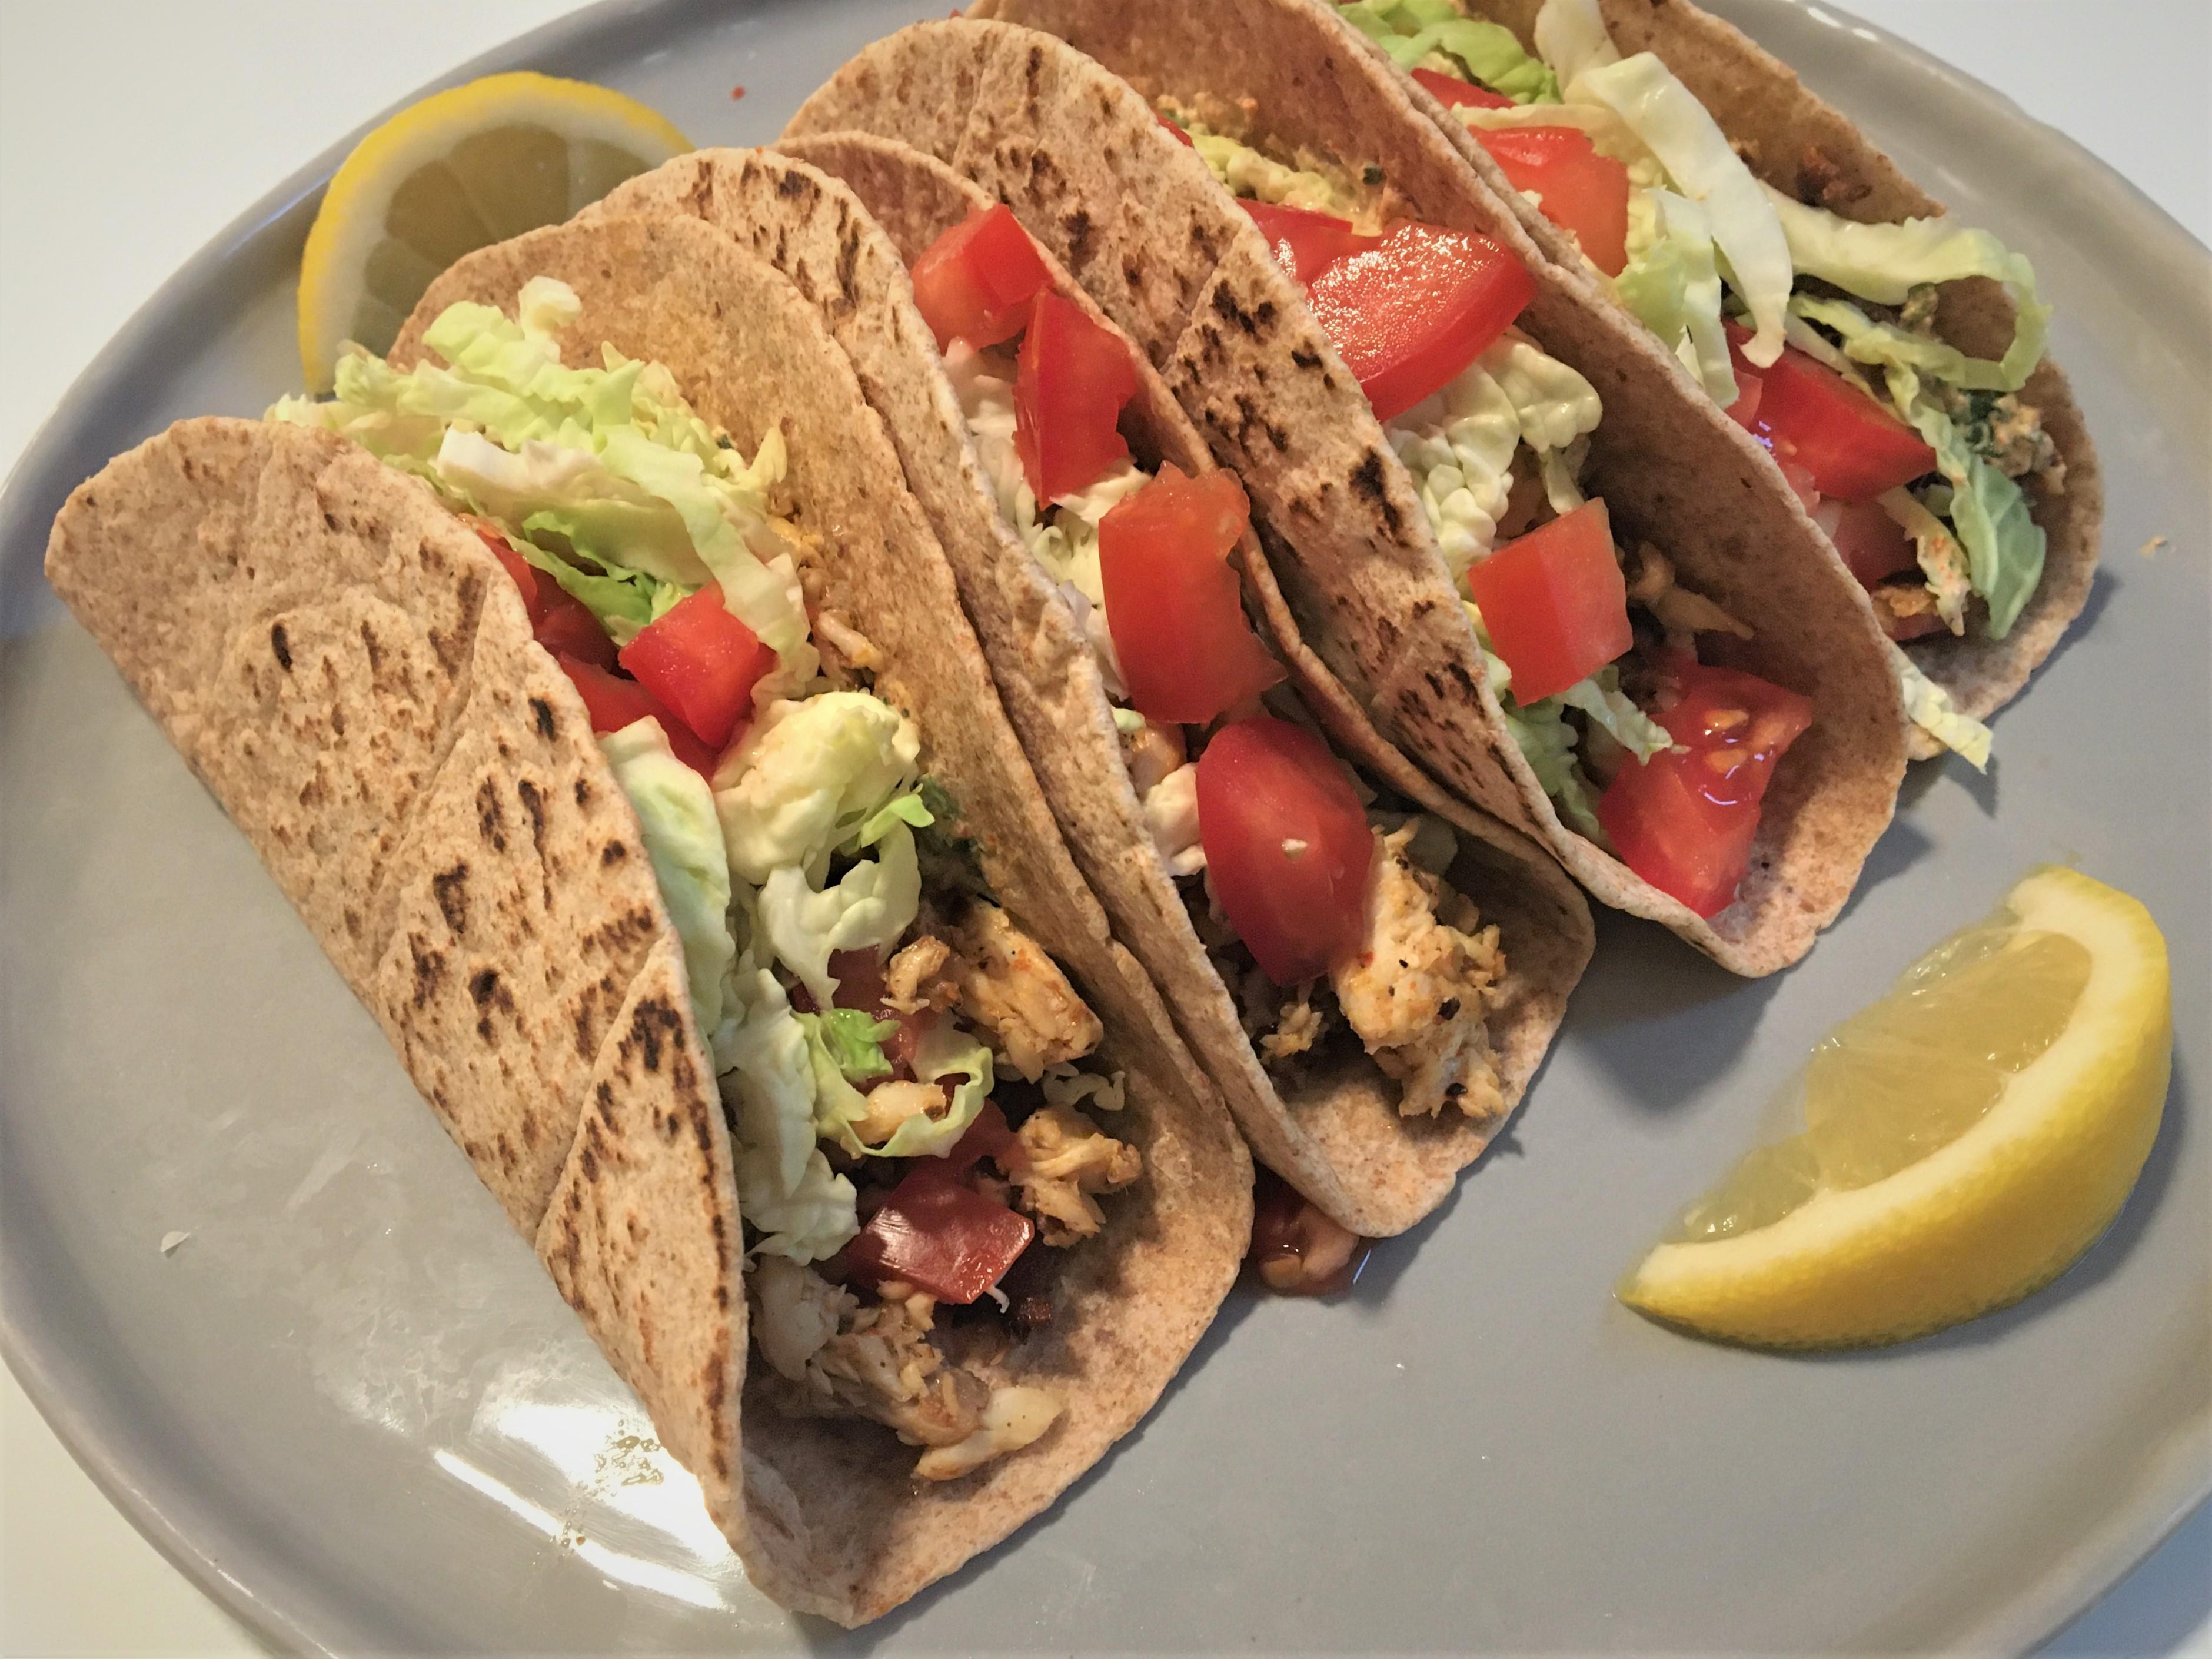 Three Whole wheat tortillas with fish, cabbage, tomatoes sitting together on a plate and garnished with lemon wedges.